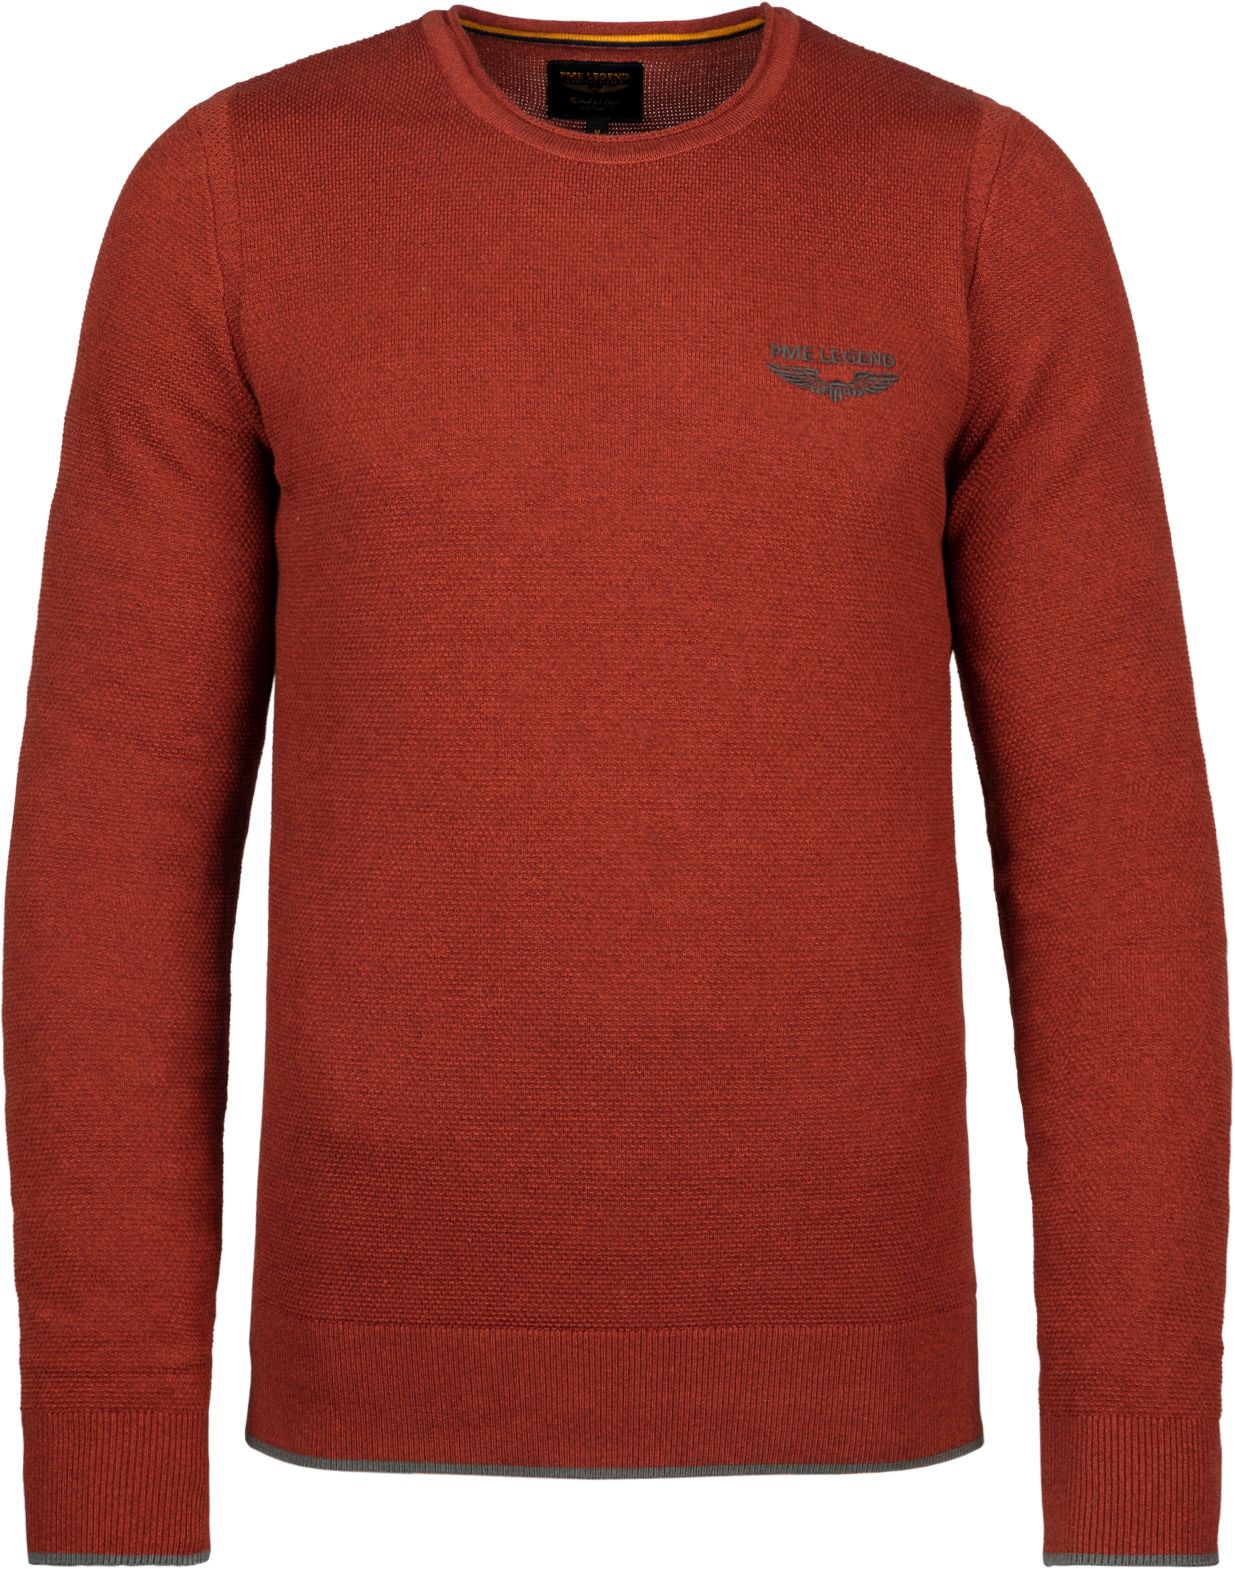 PME Legend Sweater Knitted Red size 3XL